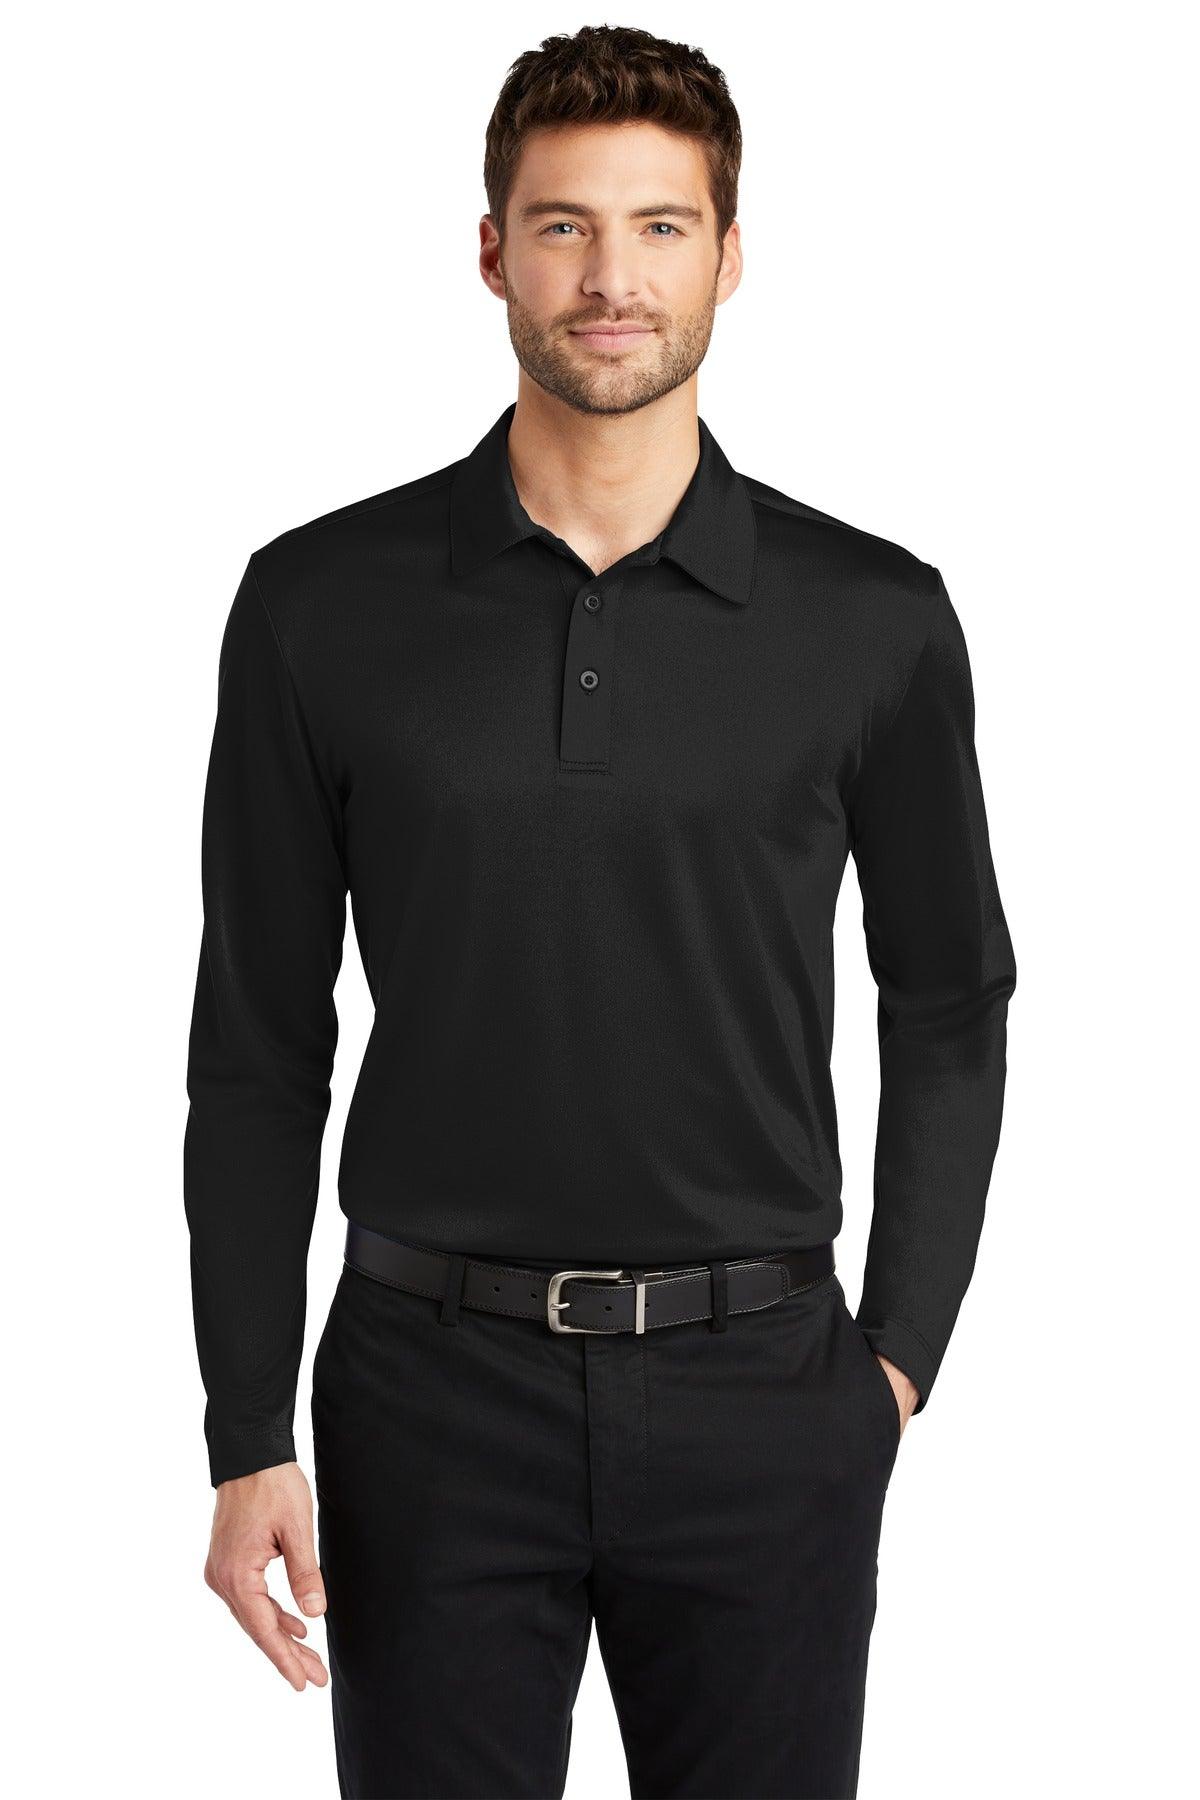 Port Authority Silk Touch Performance Long Sleeve Polo. K540LS - Dresses Max